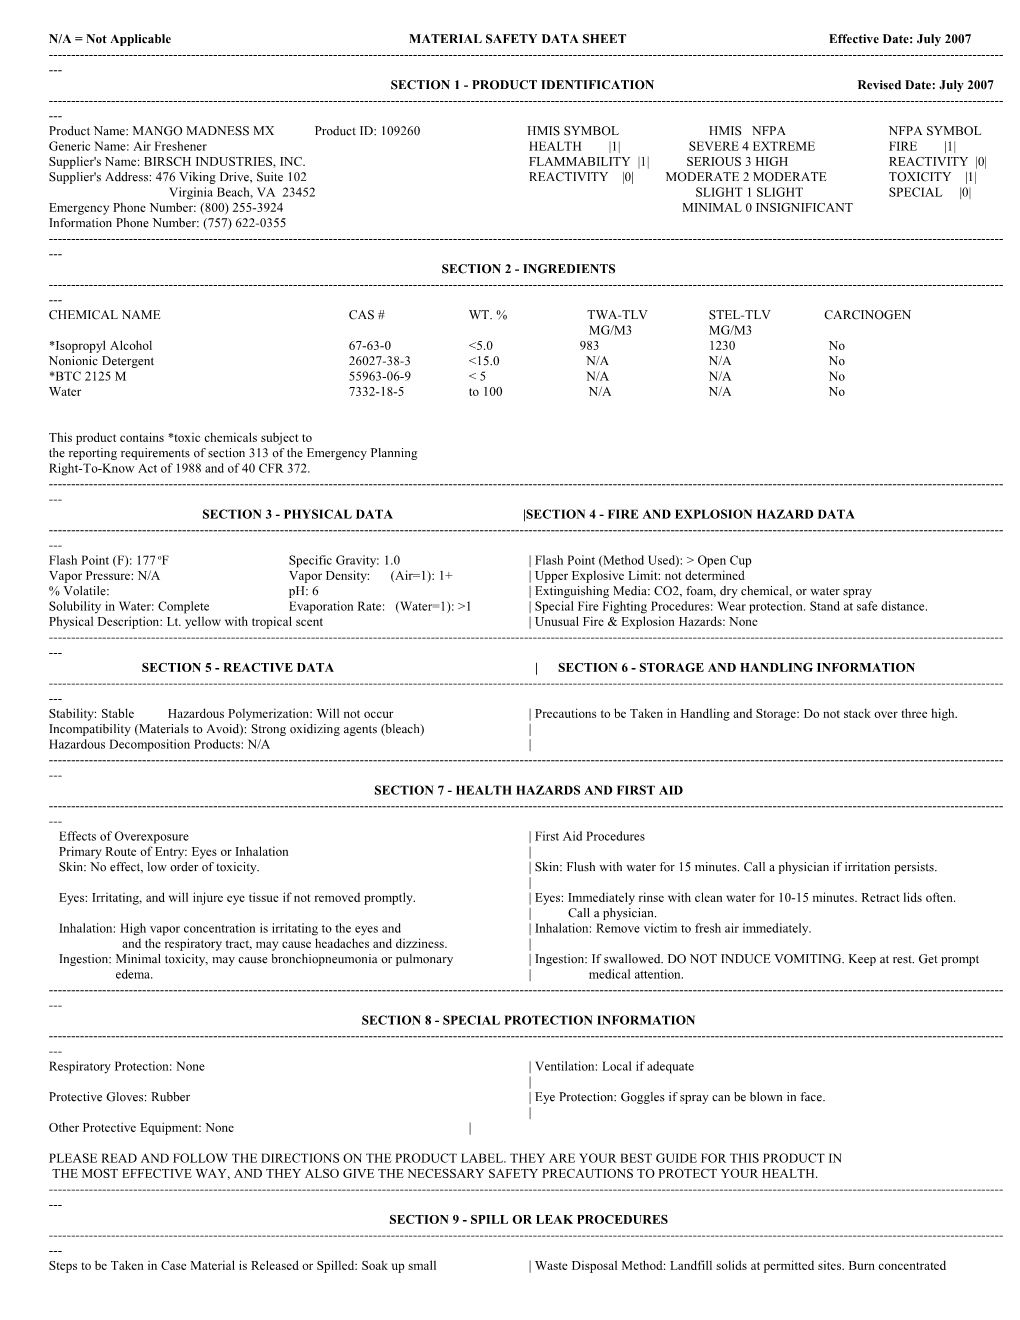 N/A = Not Applicable MATERIAL SAFETY DATA SHEET Effective Date: July 2007